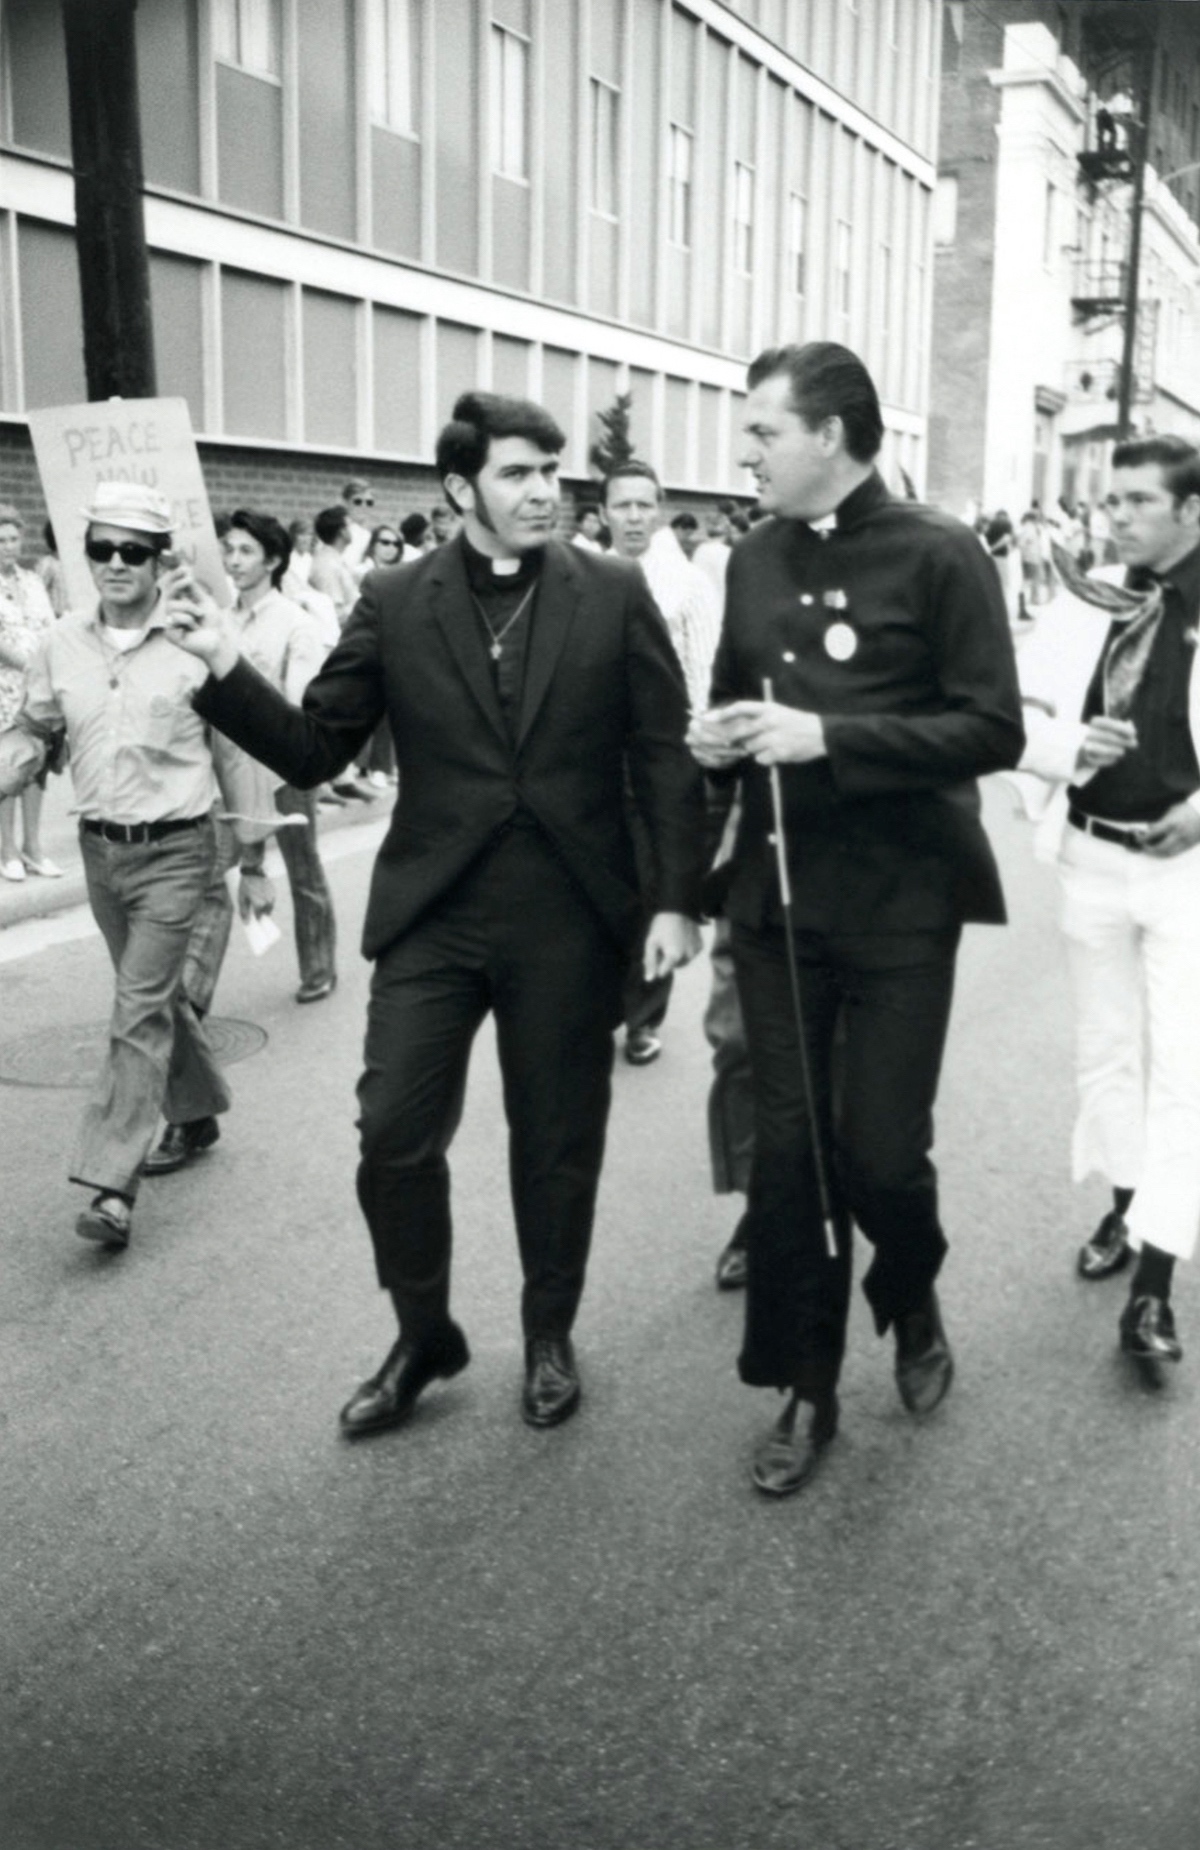 The Rev. Troy Perry takes part in the first L.A. Pride Parade (with Rev. Bob Humphries), which he helped to organize in 1970. Courtesy of Rev. Troy Perry.